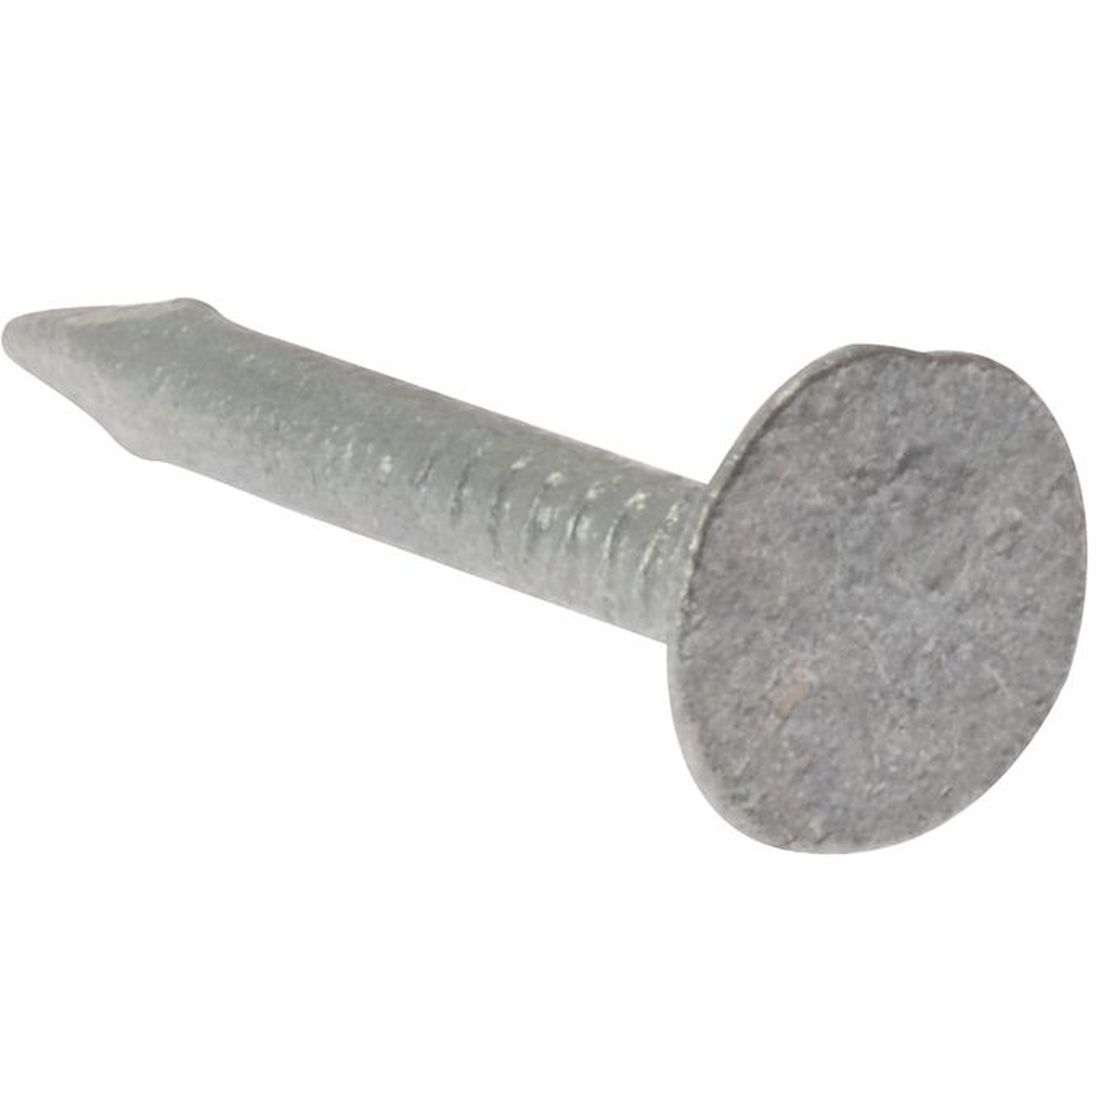 ForgeFix Clout Nail Extra Large Head Galvanised 30mm (500g Bag)                          